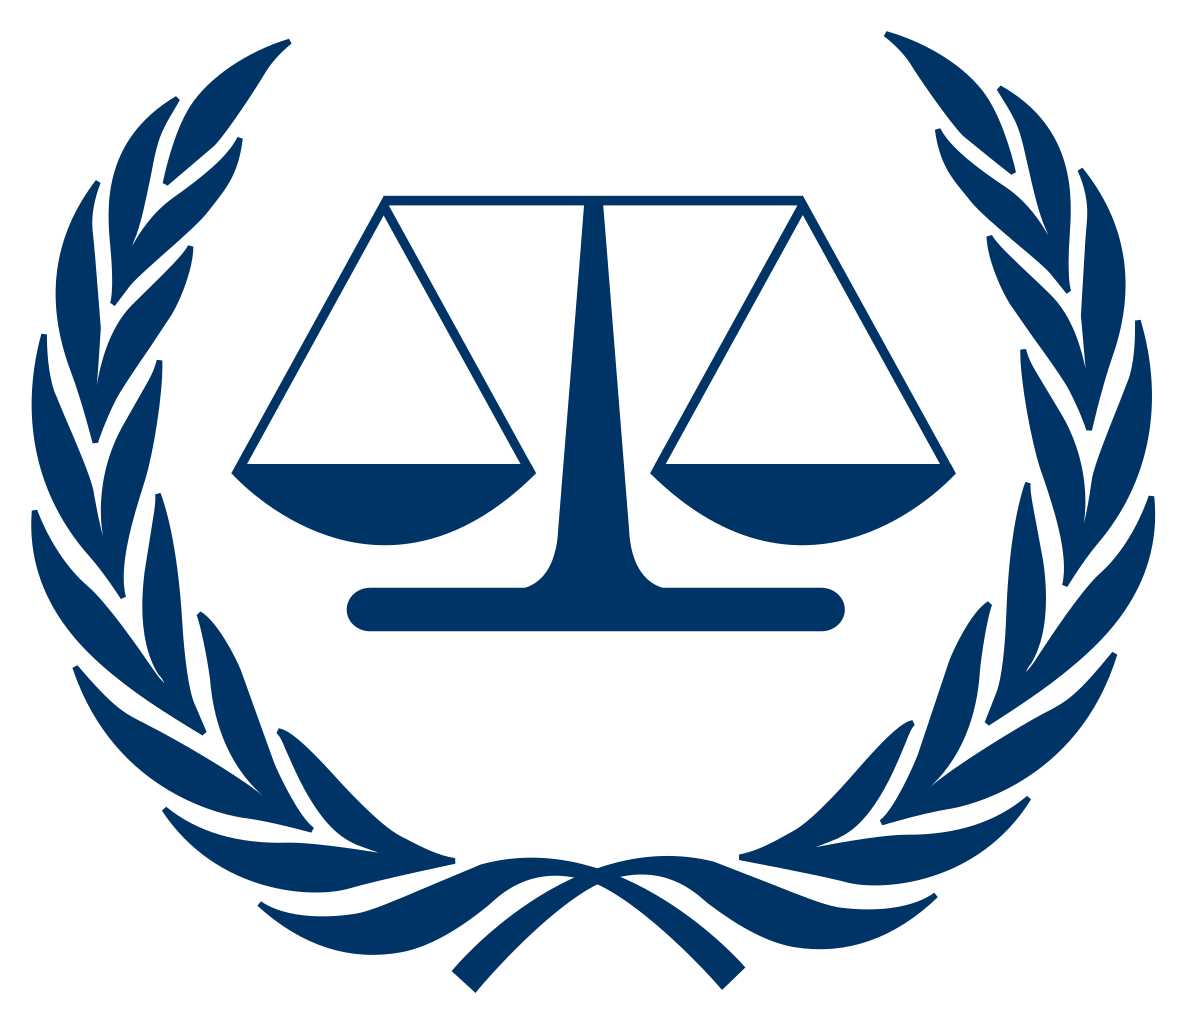 United Nations commission on crime prevention and criminal justice Logo